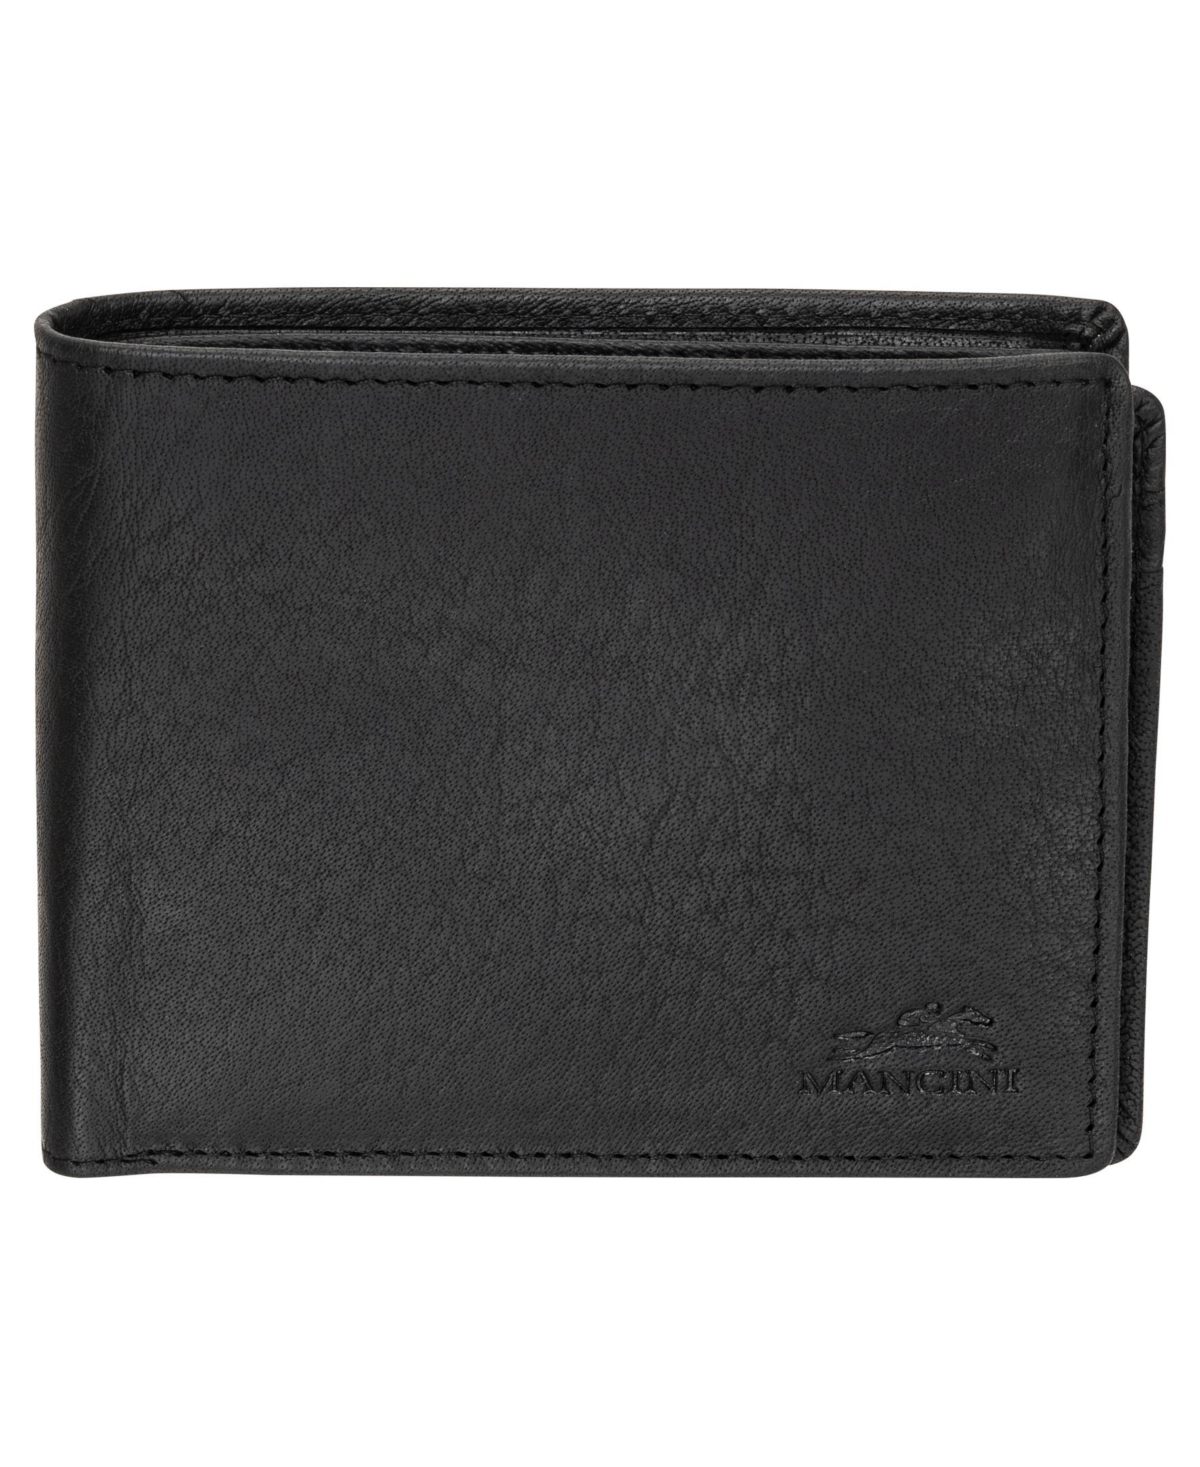 Mancini Men's Buffalo Rfid Secure Center Wing Wallet With Coin Pocket In Black